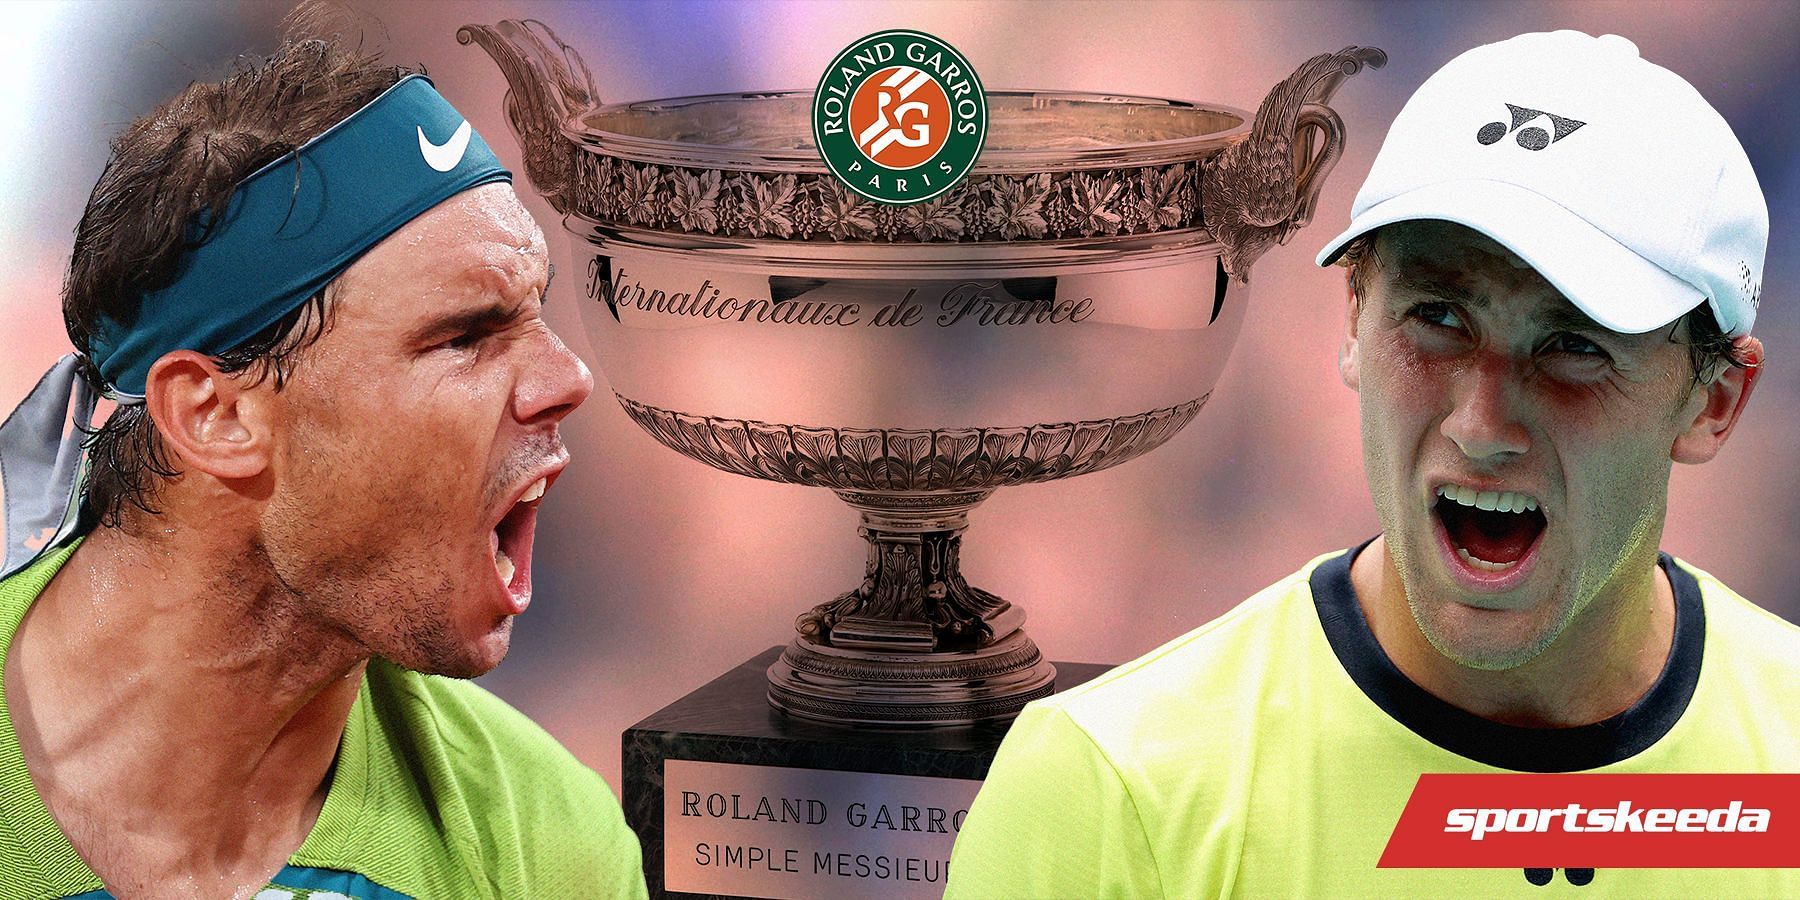 Rafael Nadal will take on Casper Ruud in the 2022 French Open final on Sunday.